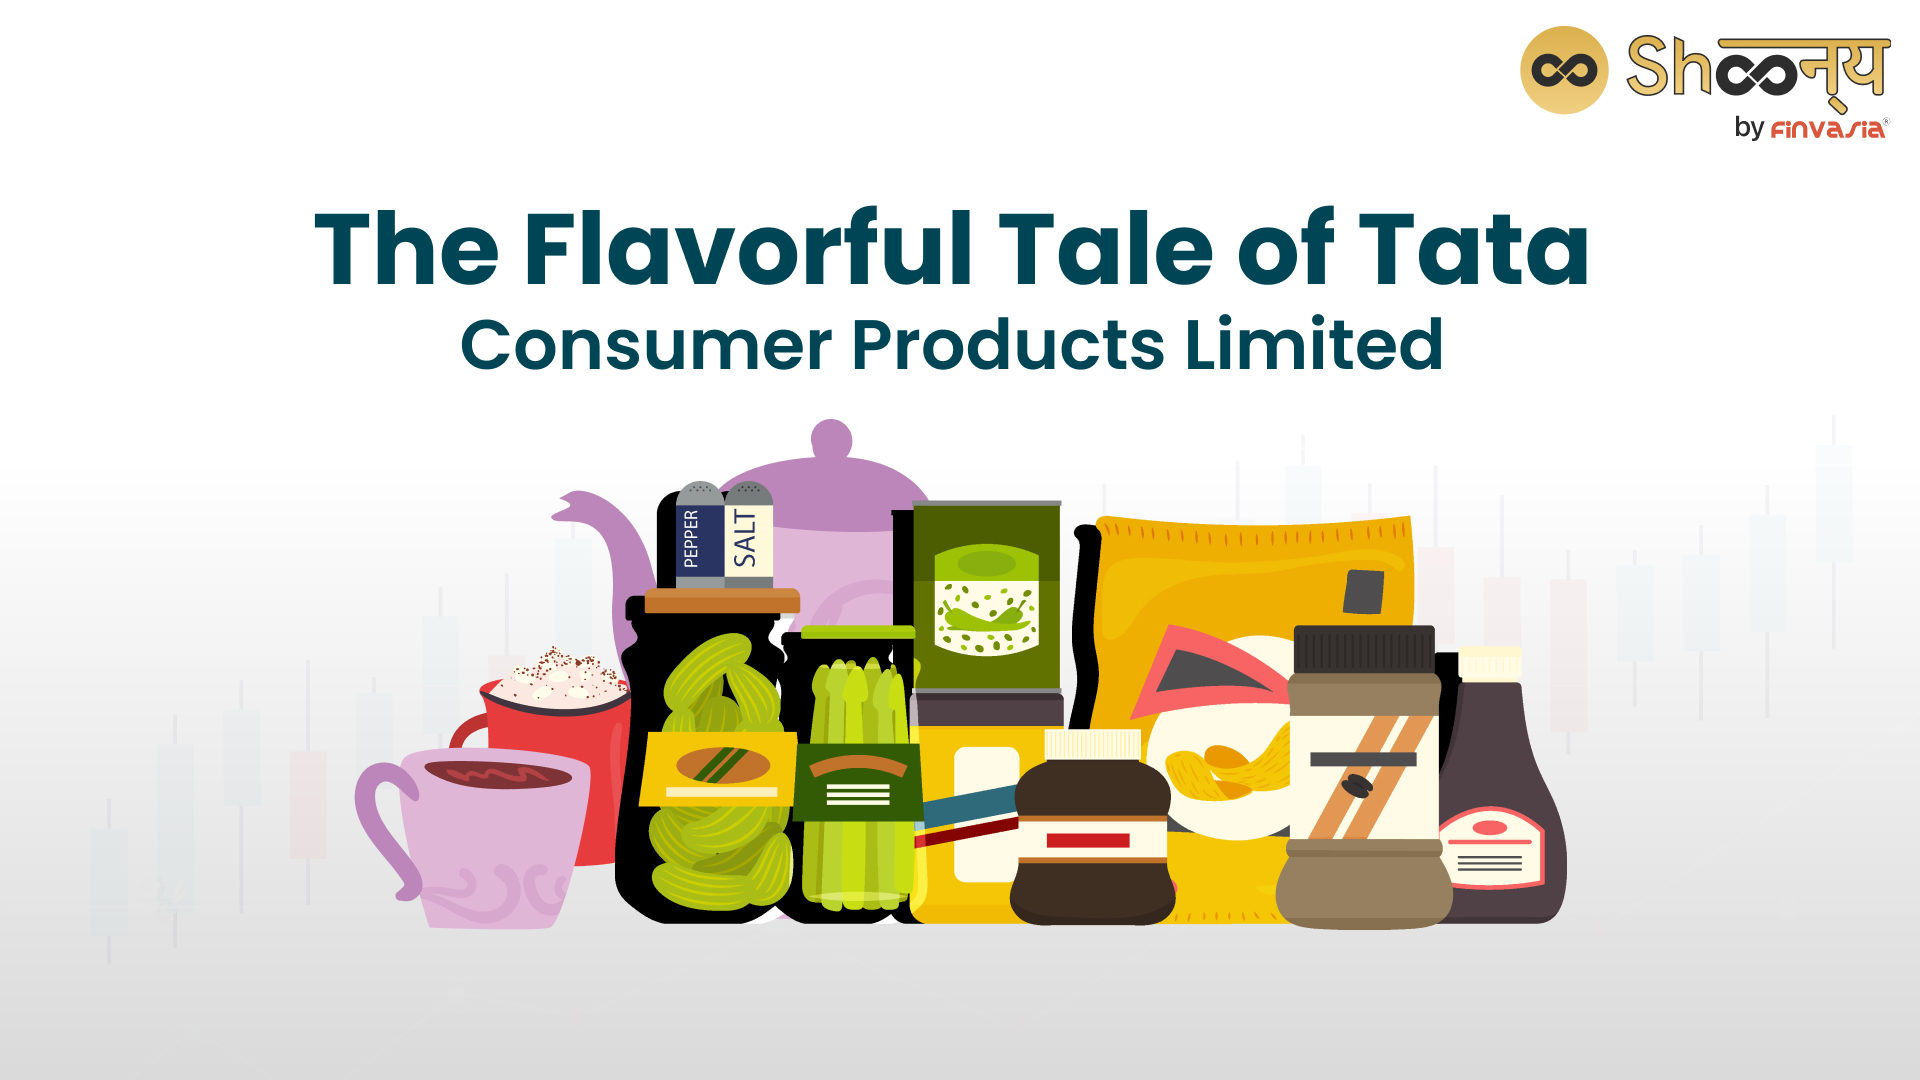 The Flavorful Tale of Tata Consumer Products Limited